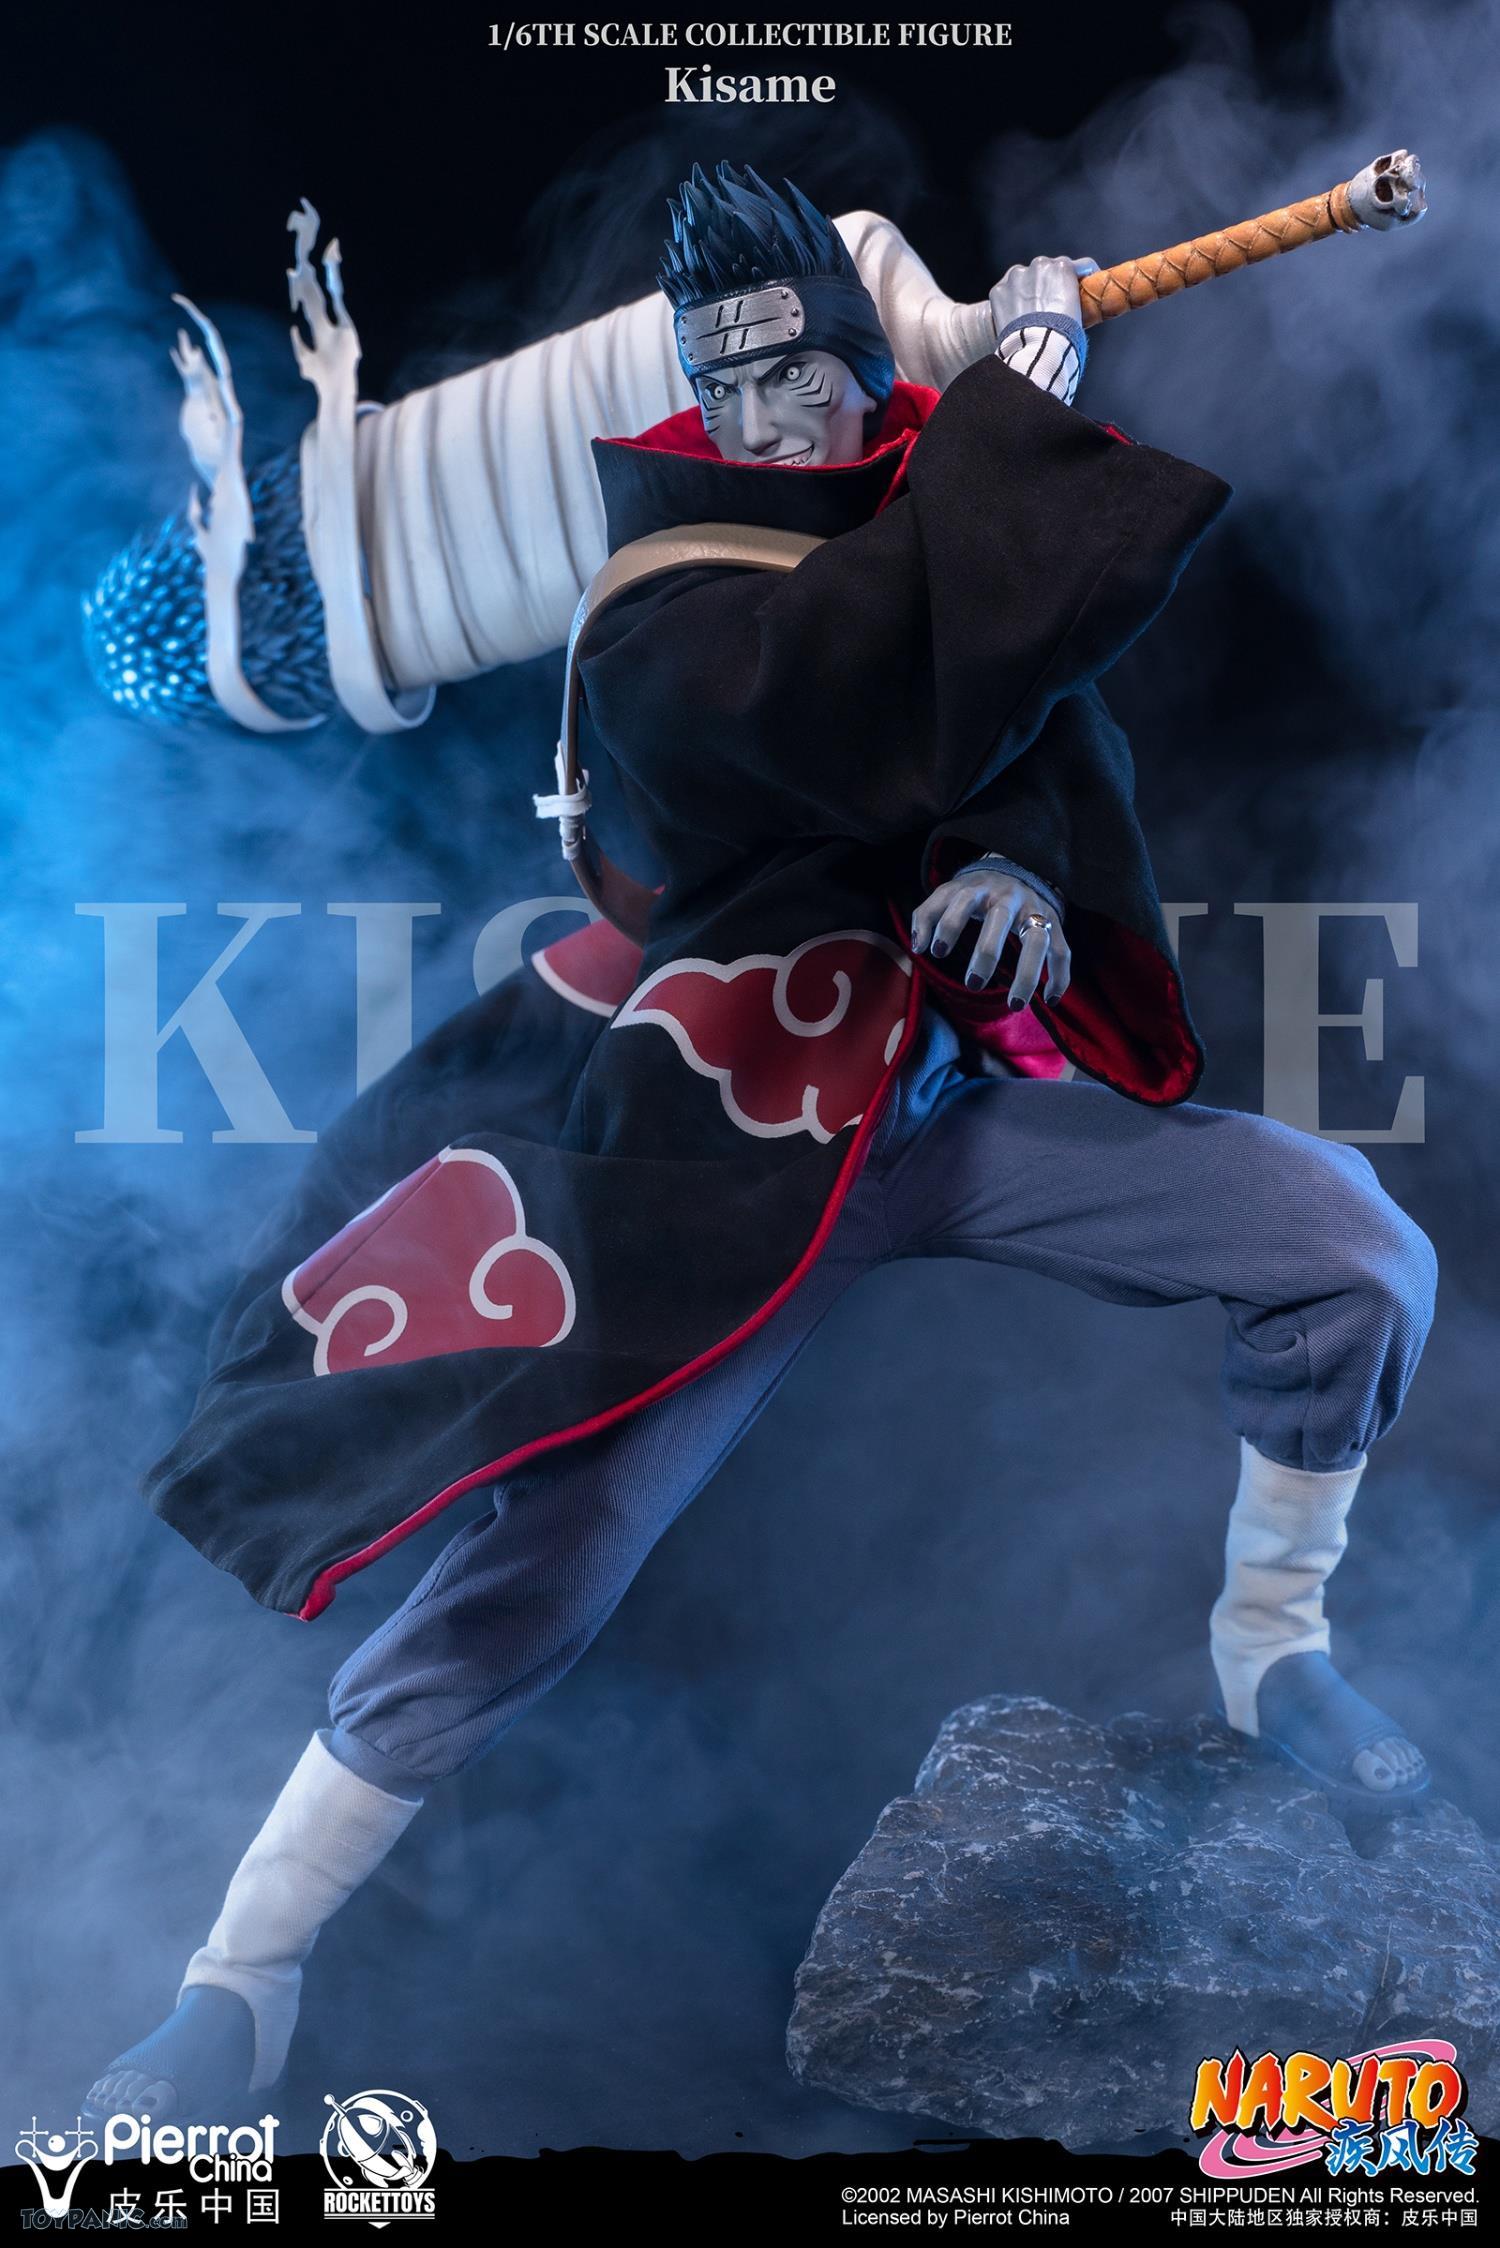 pierrot - NEW PRODUCT: Rocket Toys ROC-007 1/6 Scale Kisame 221202460435PM_6417009